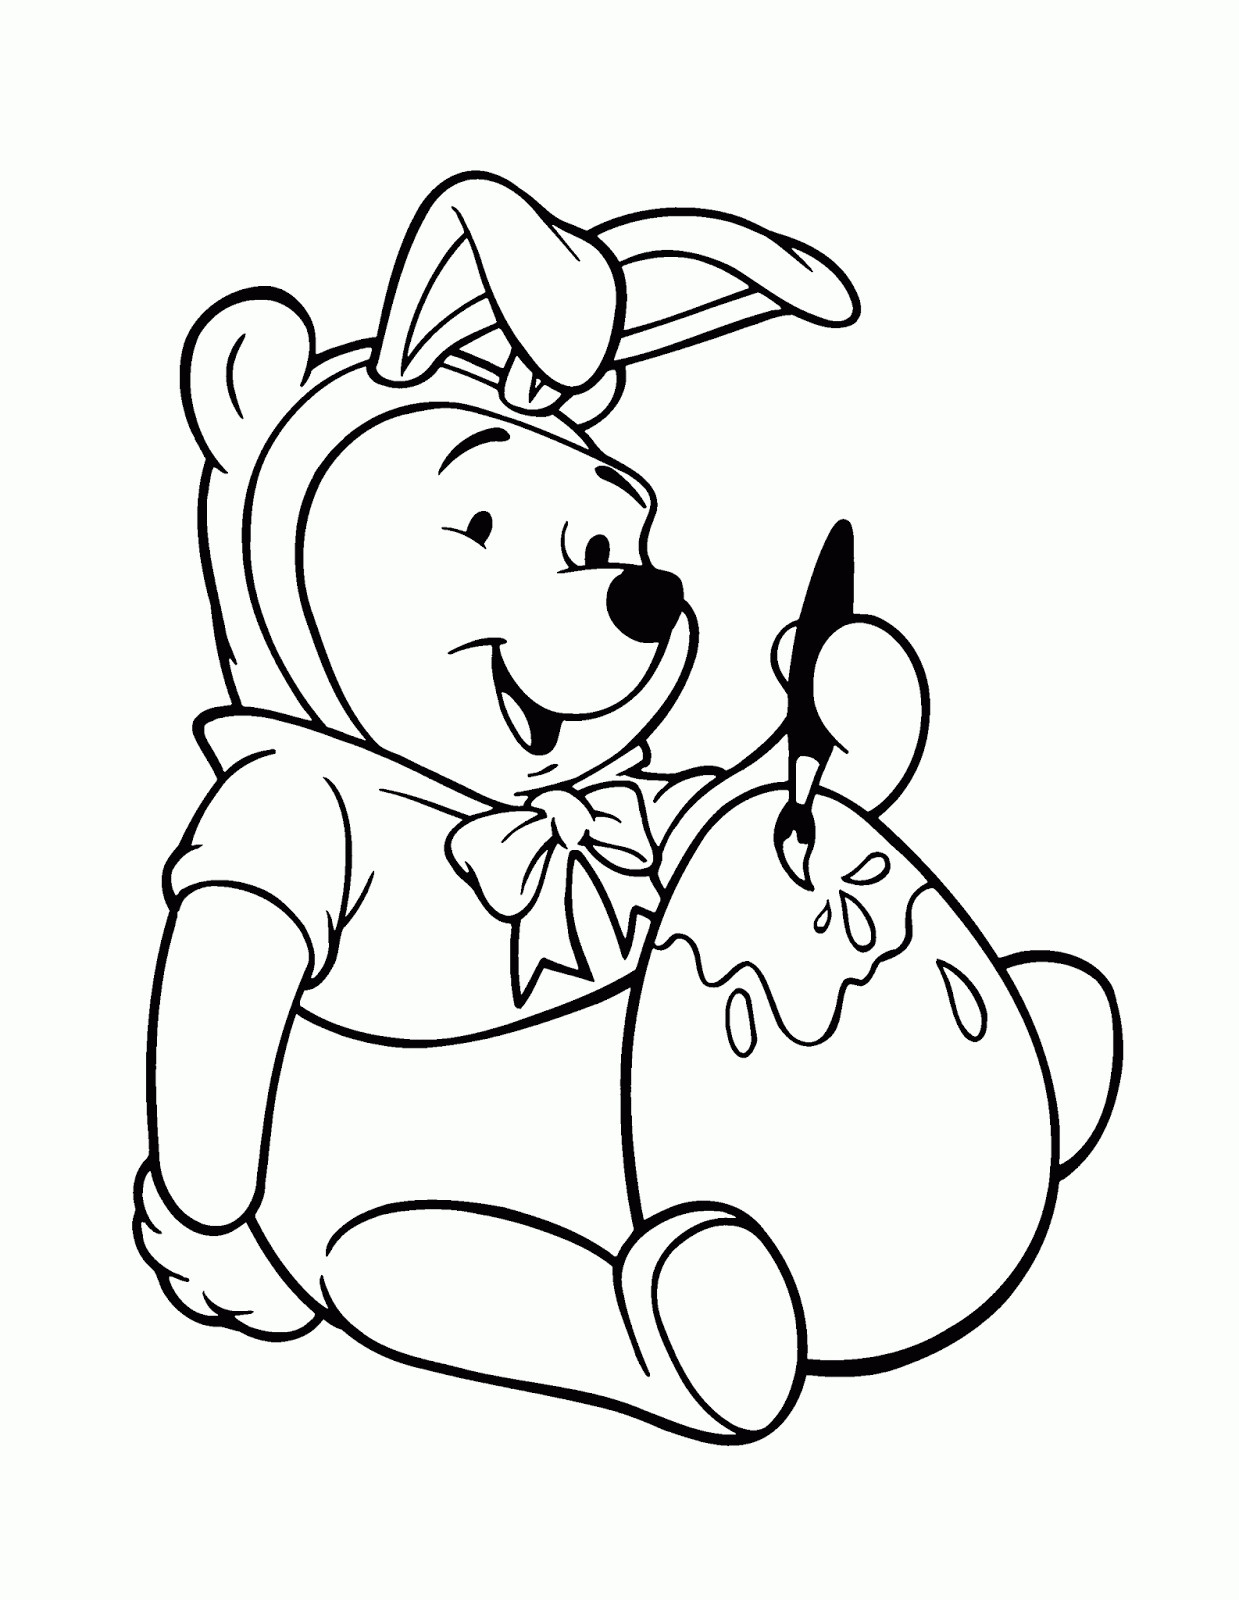 Winnie The Pooh Printable Coloring Pages
 Coloring Pages Winnie the Pooh and Friends Free Printable